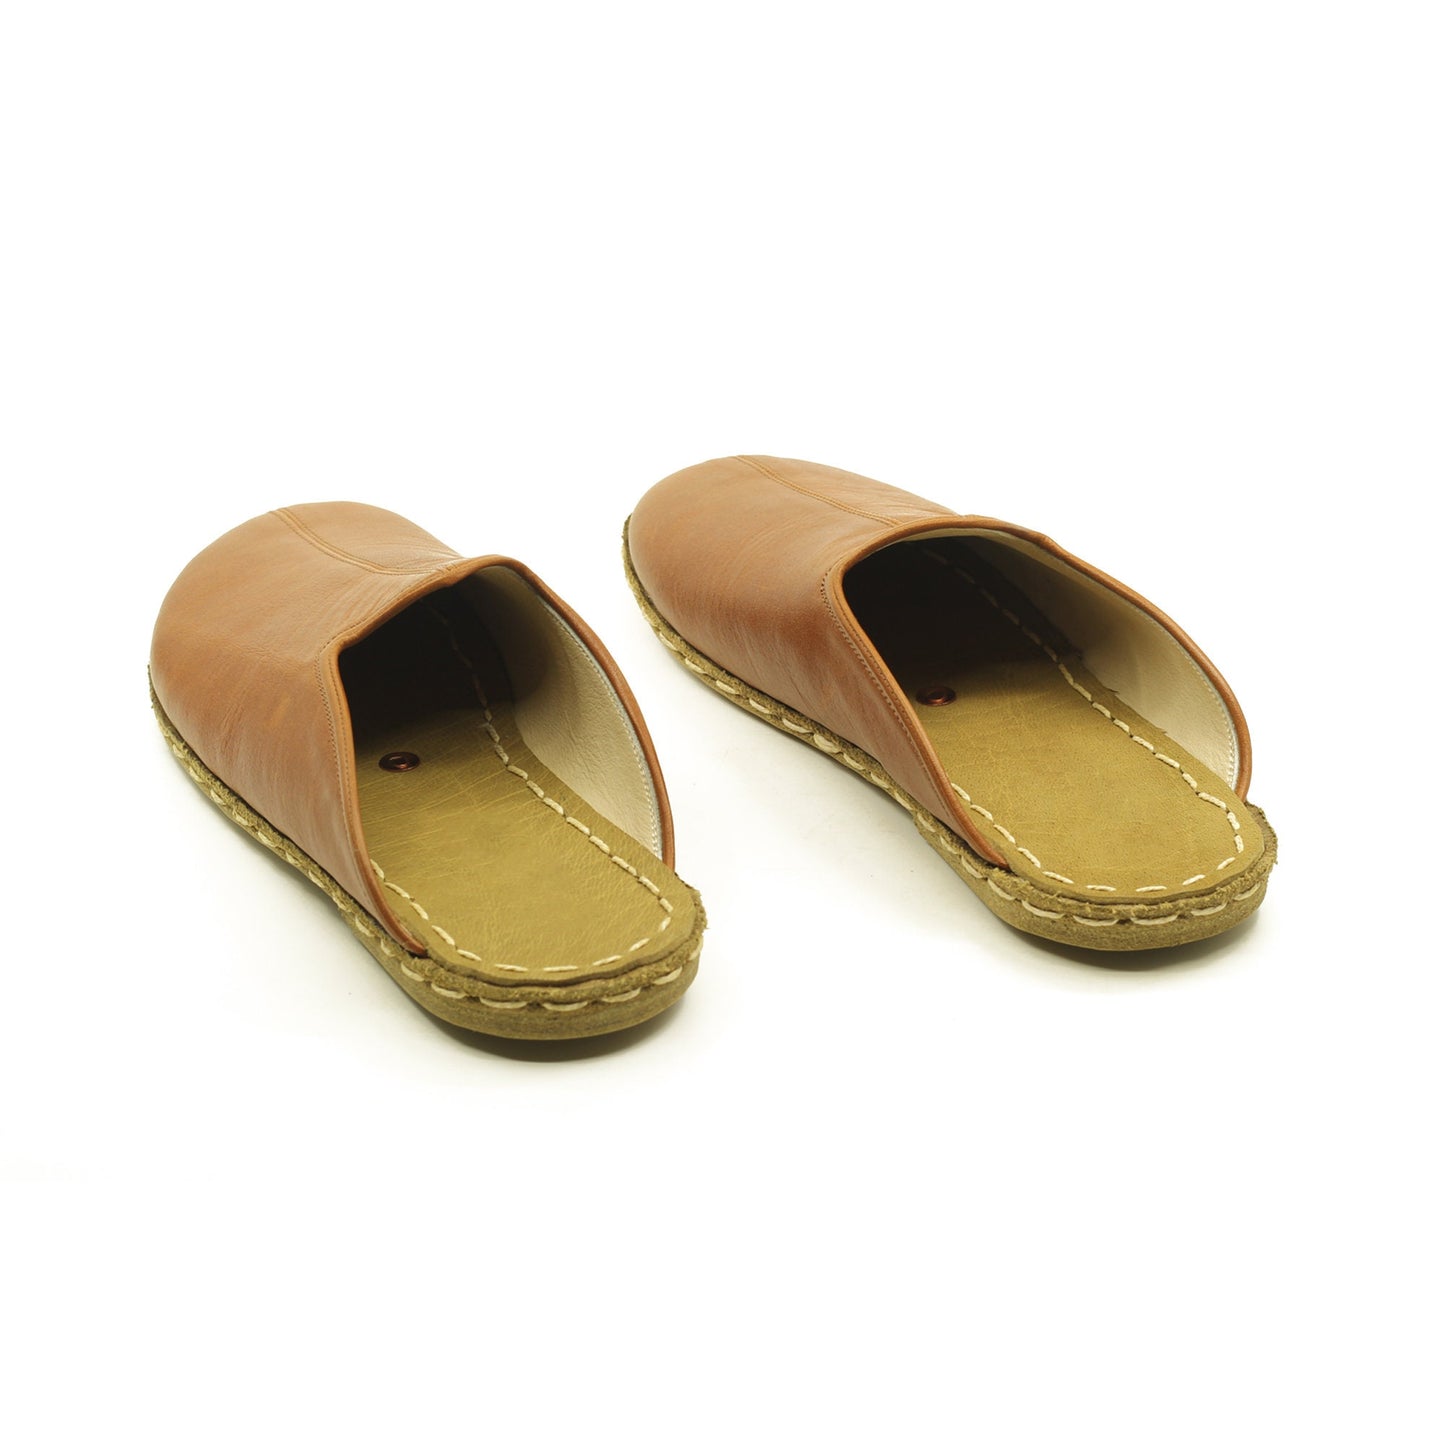 Barefoot - close toed slippers - Antique Brown Leather - Winter Slippers - Copper Rivet - For Women